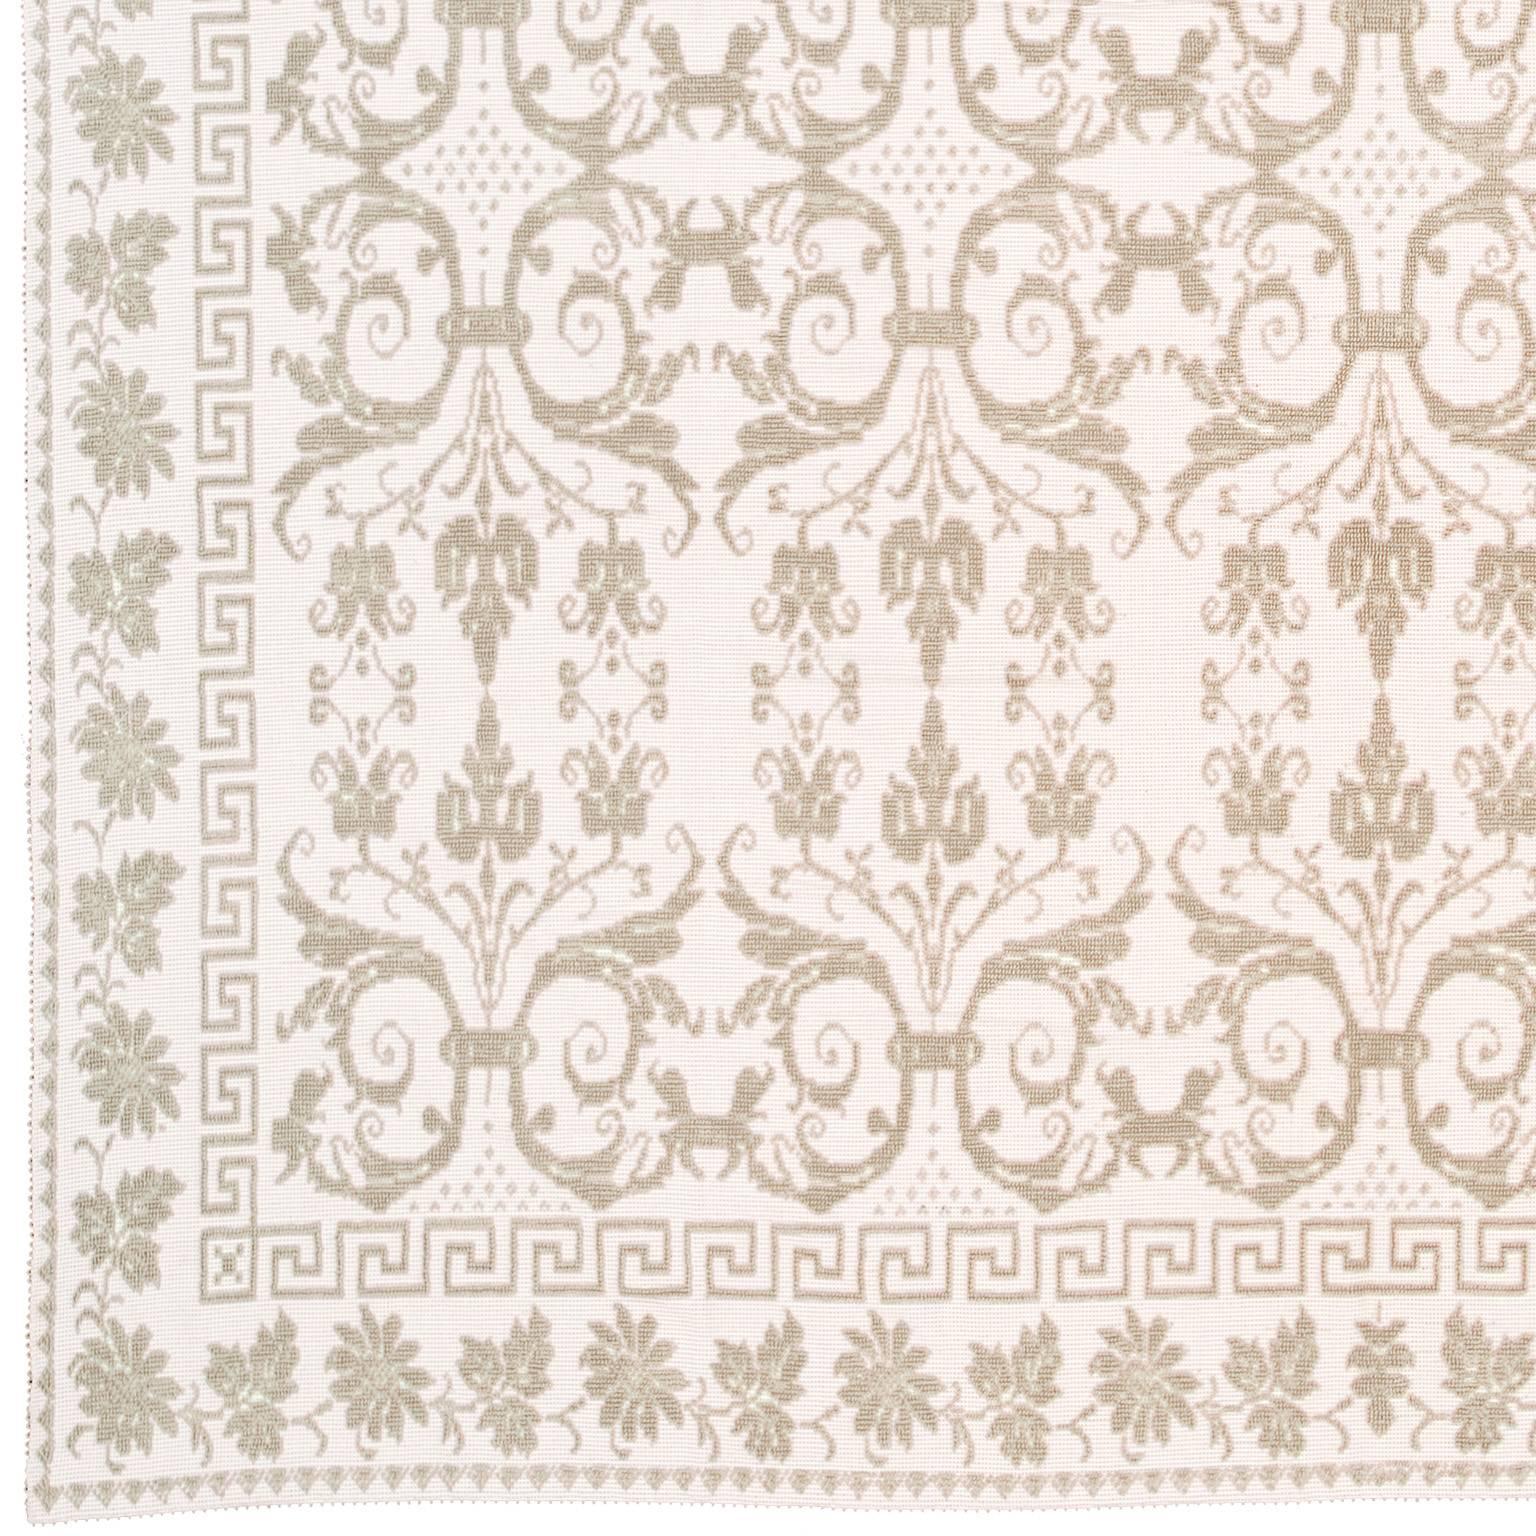 Contemporary Sardinian 'Coperta Tiziana' Carpet
Sardinia, Italy.  
ca. 2009
80% Gray Linen 20% Cotton

This textile embodies the ancient and handcrafted artistic tradition of the island of Sardinia. The ‘pibiones’ hand-weaving technique creates